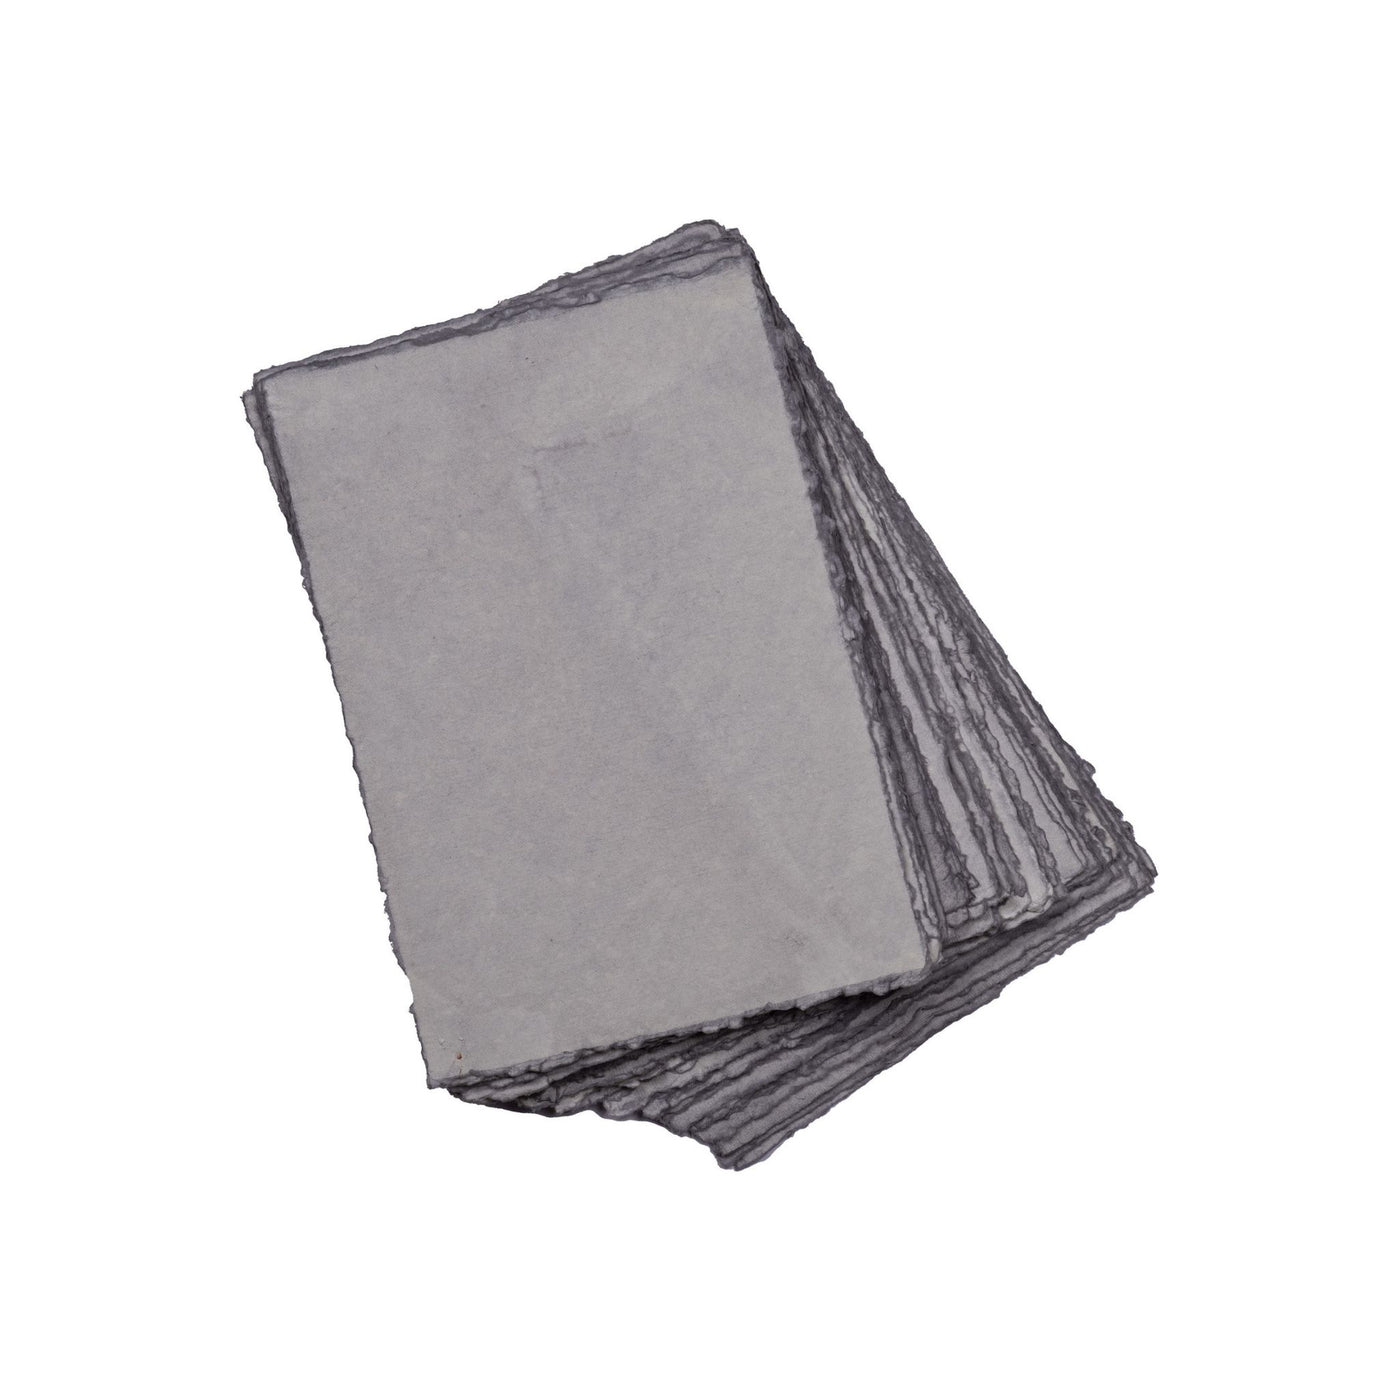 Leather Village - Handmade Cotton Watercolor Paper - 7 x 10 - 200 GSM -  Grey 